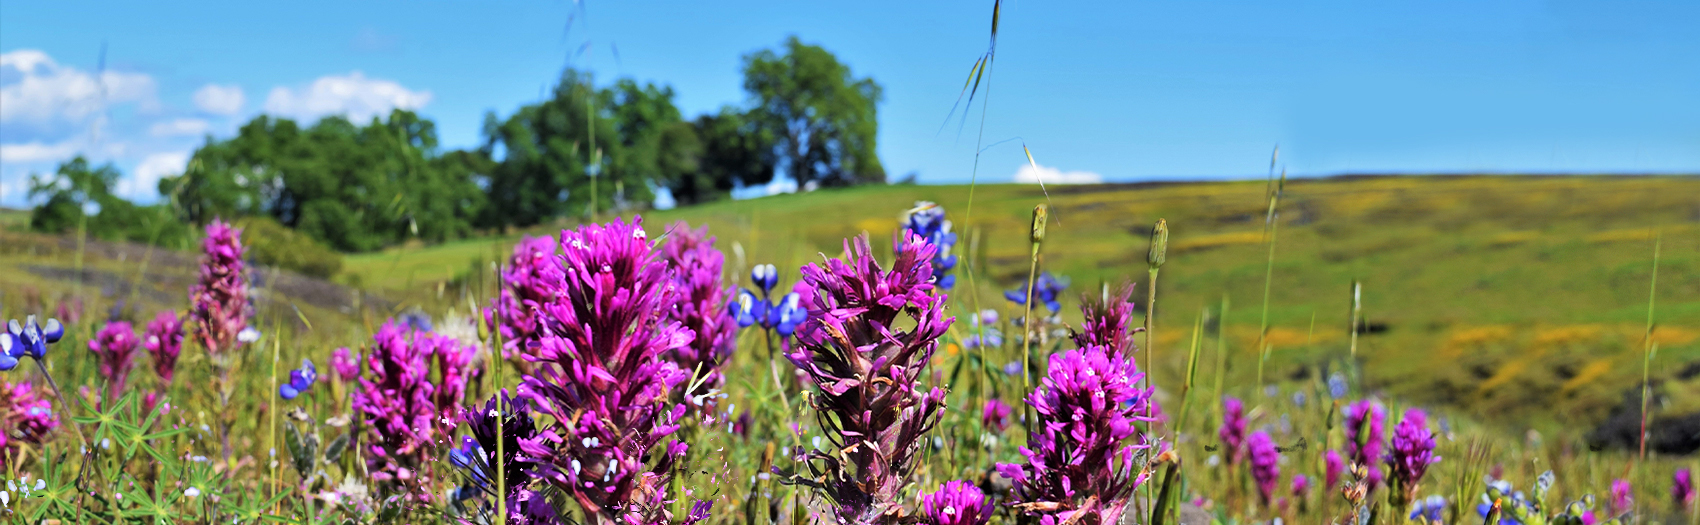 A green field with purple, pink, and blue wild flowers